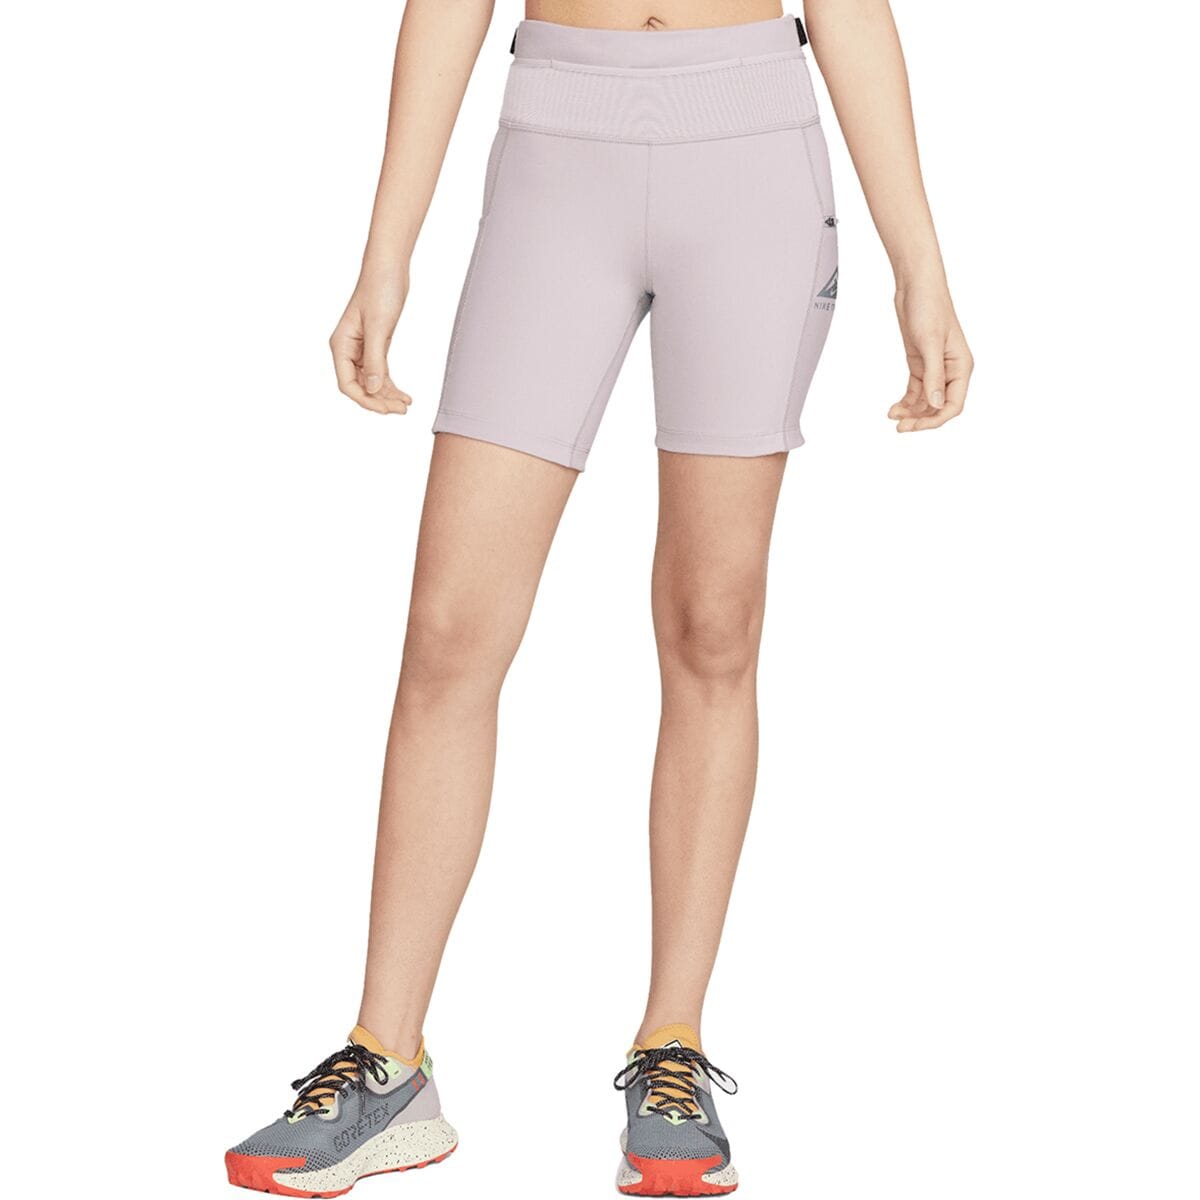 Nike Dri-FIT Epic Luxe Trail Running Tight Short - Women's